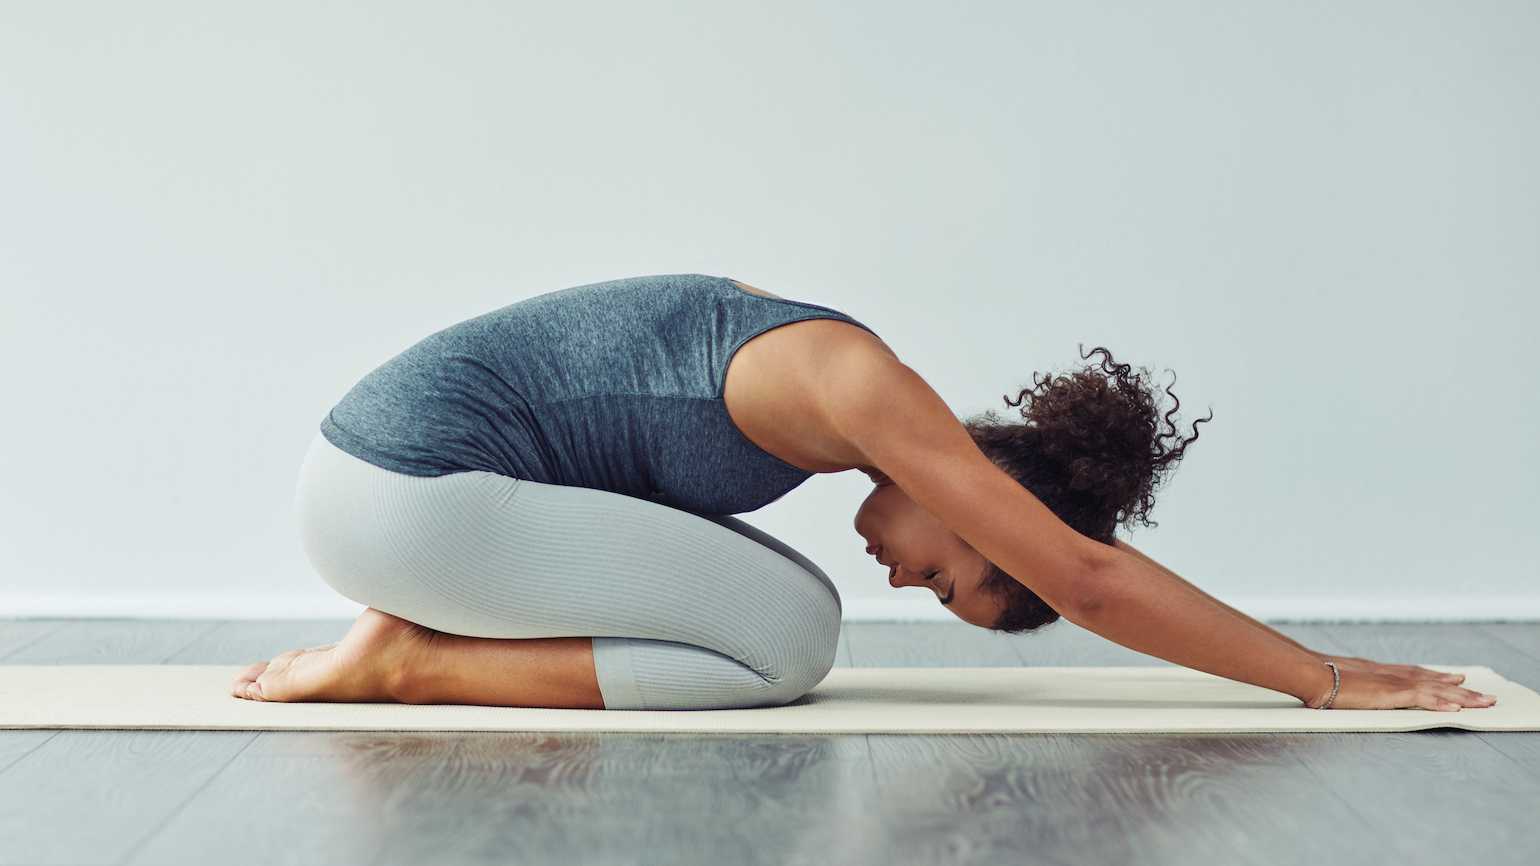 What is Yoga and How Do You Practice It?
